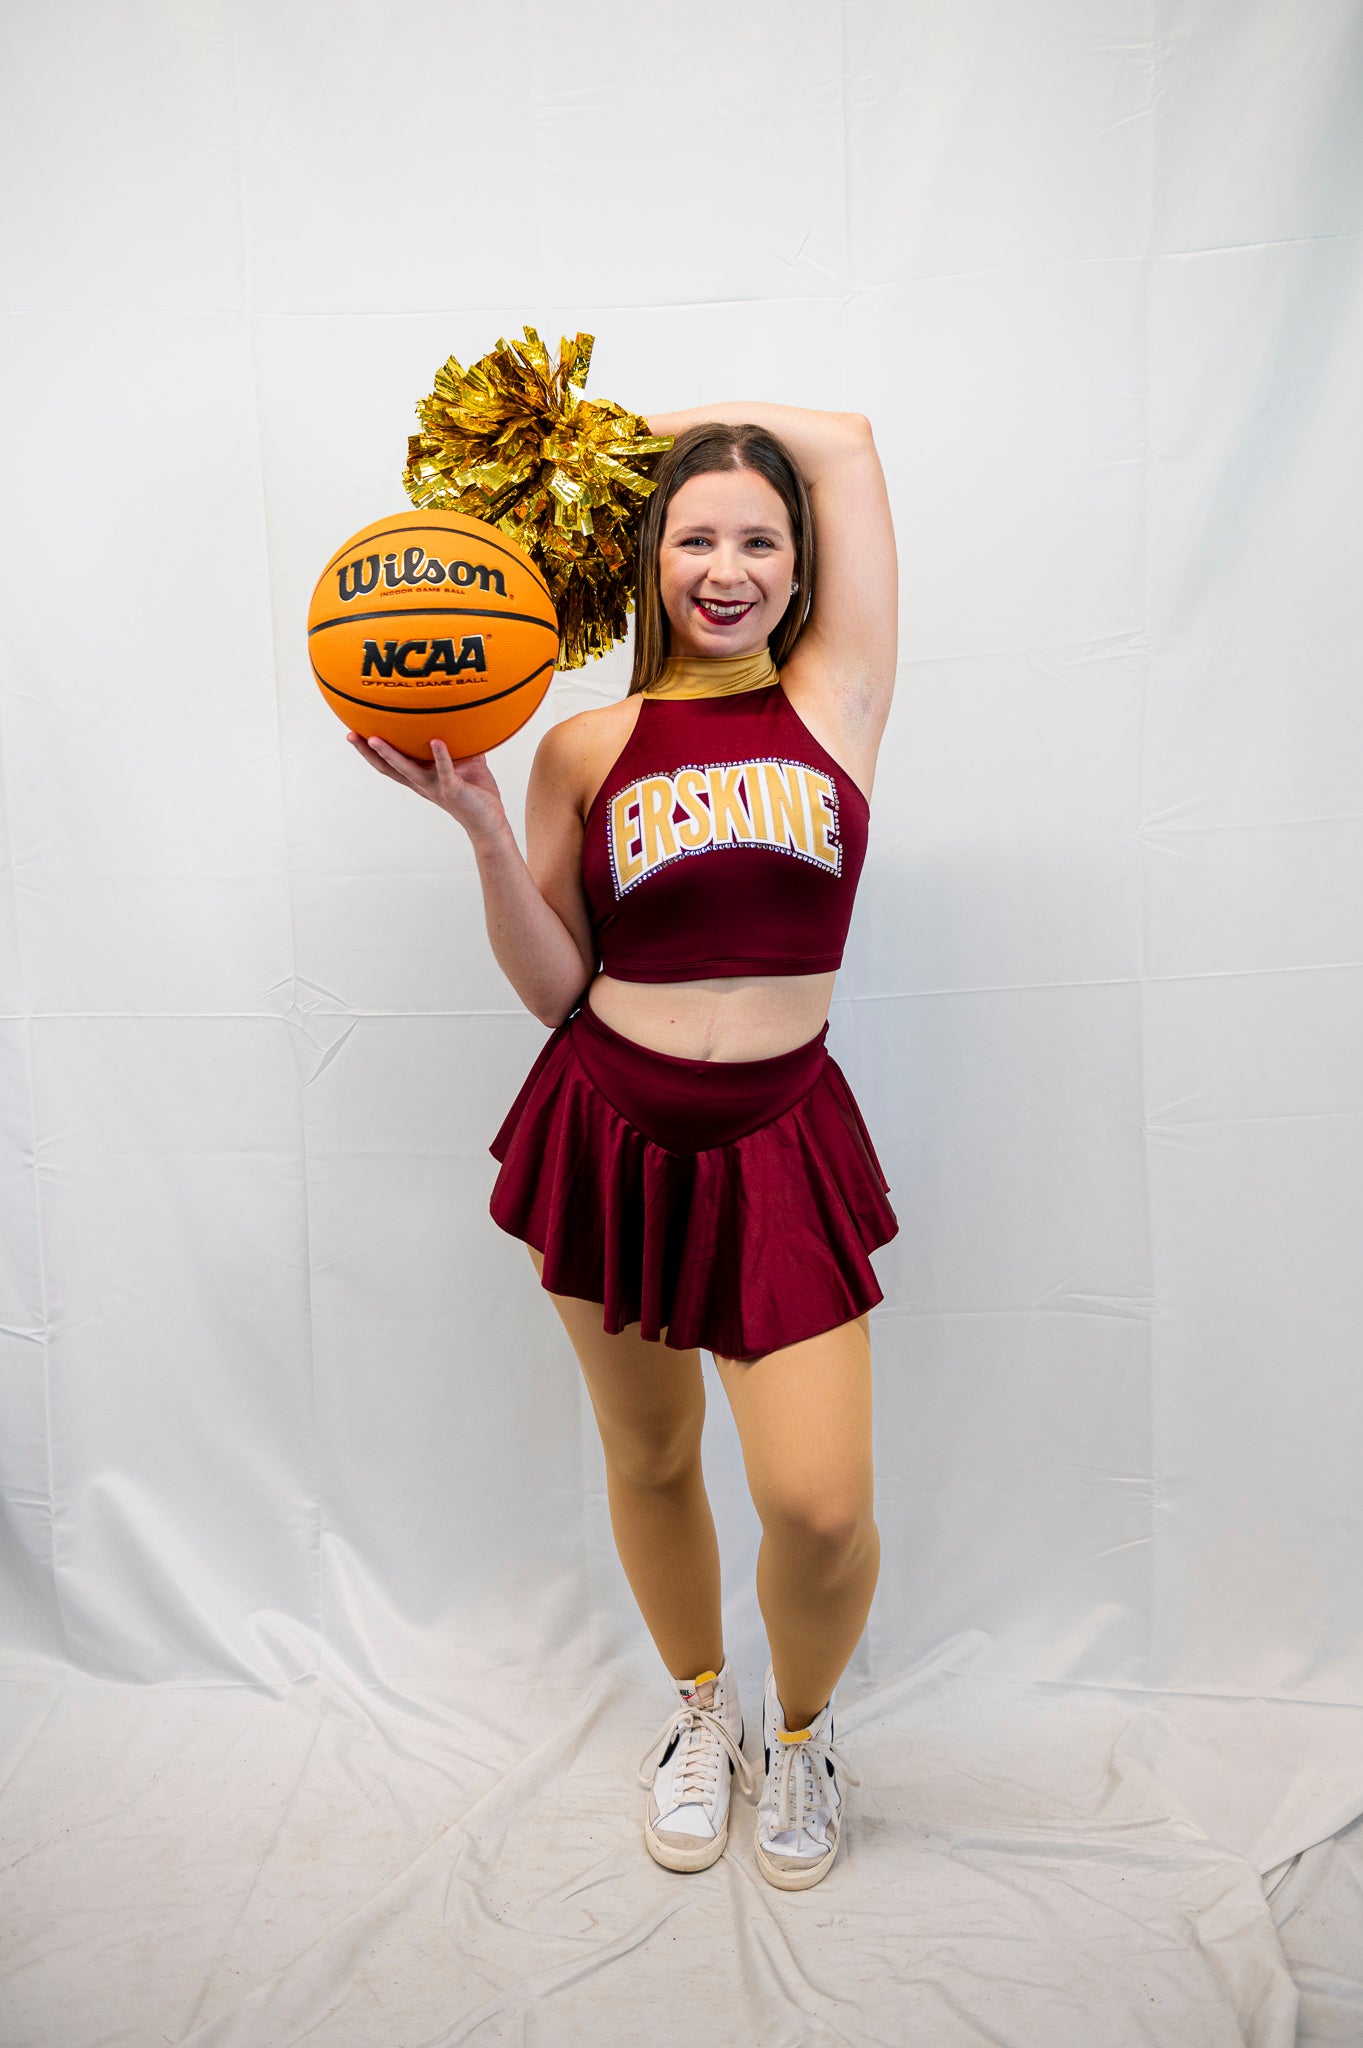 A member of the cheer team holds a basketball